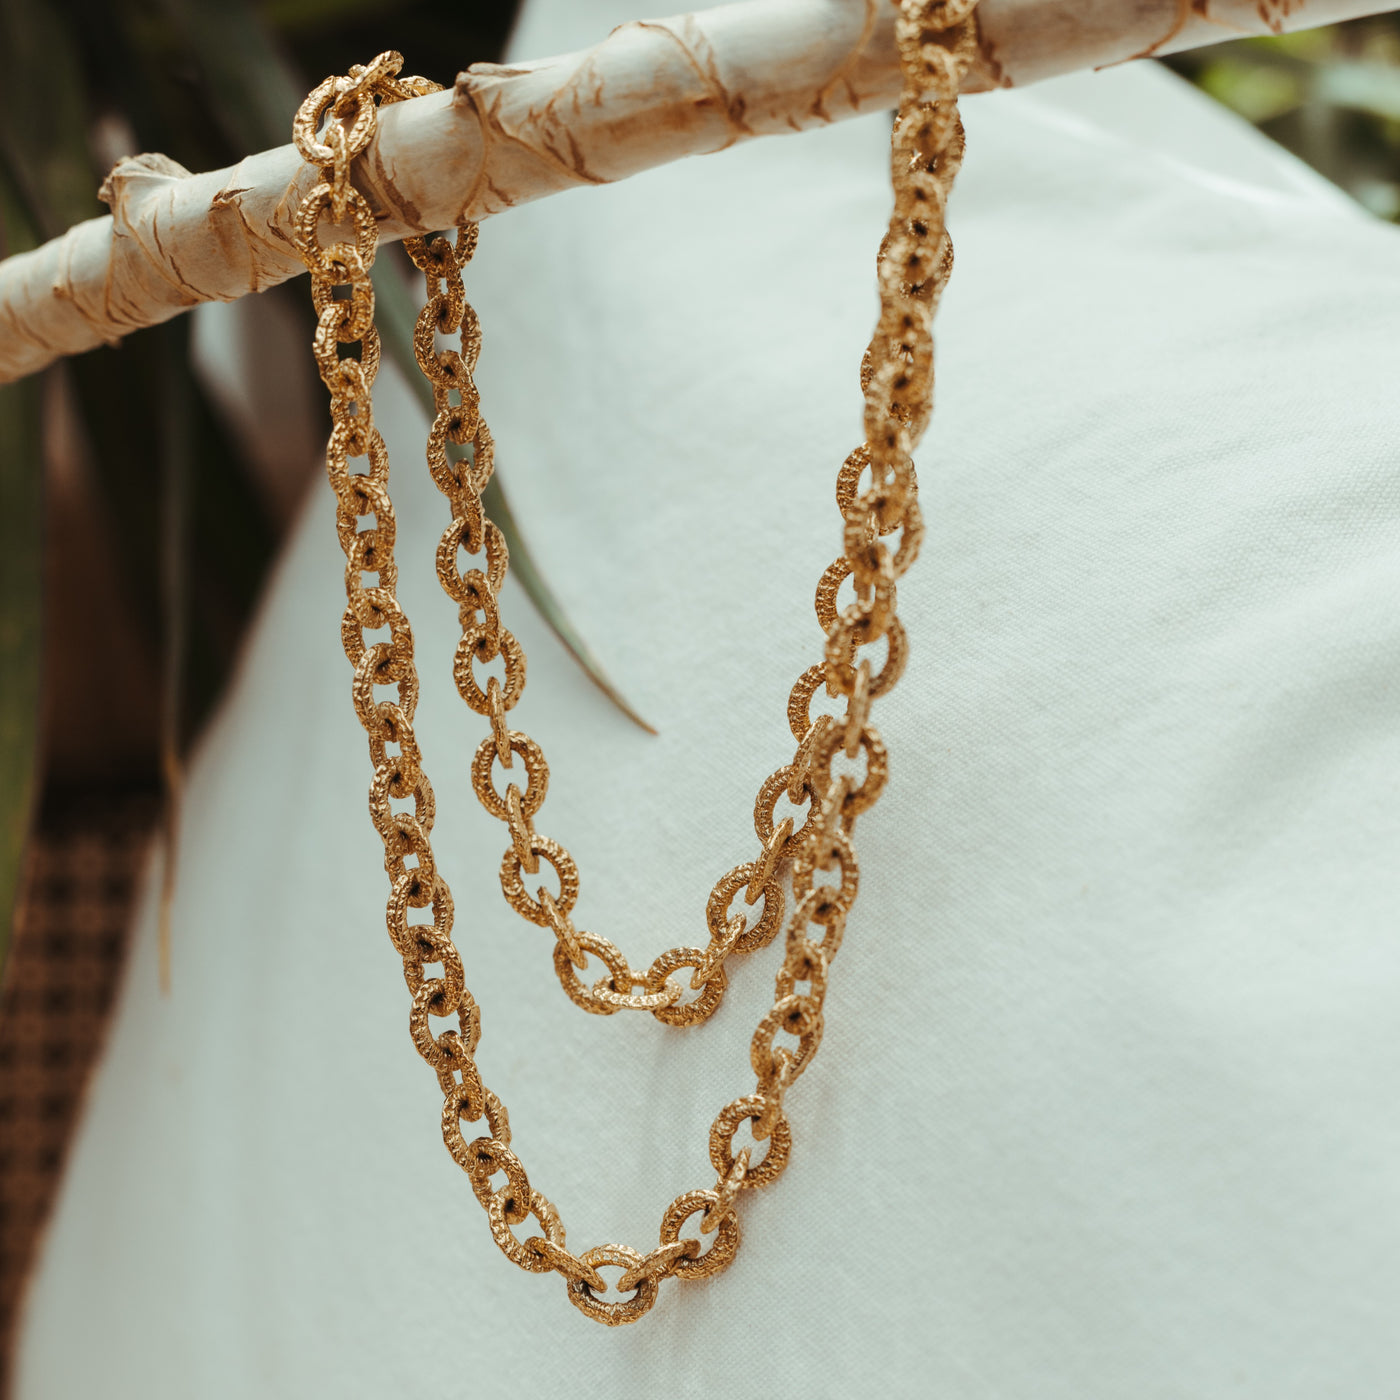 Gina Chain Necklace